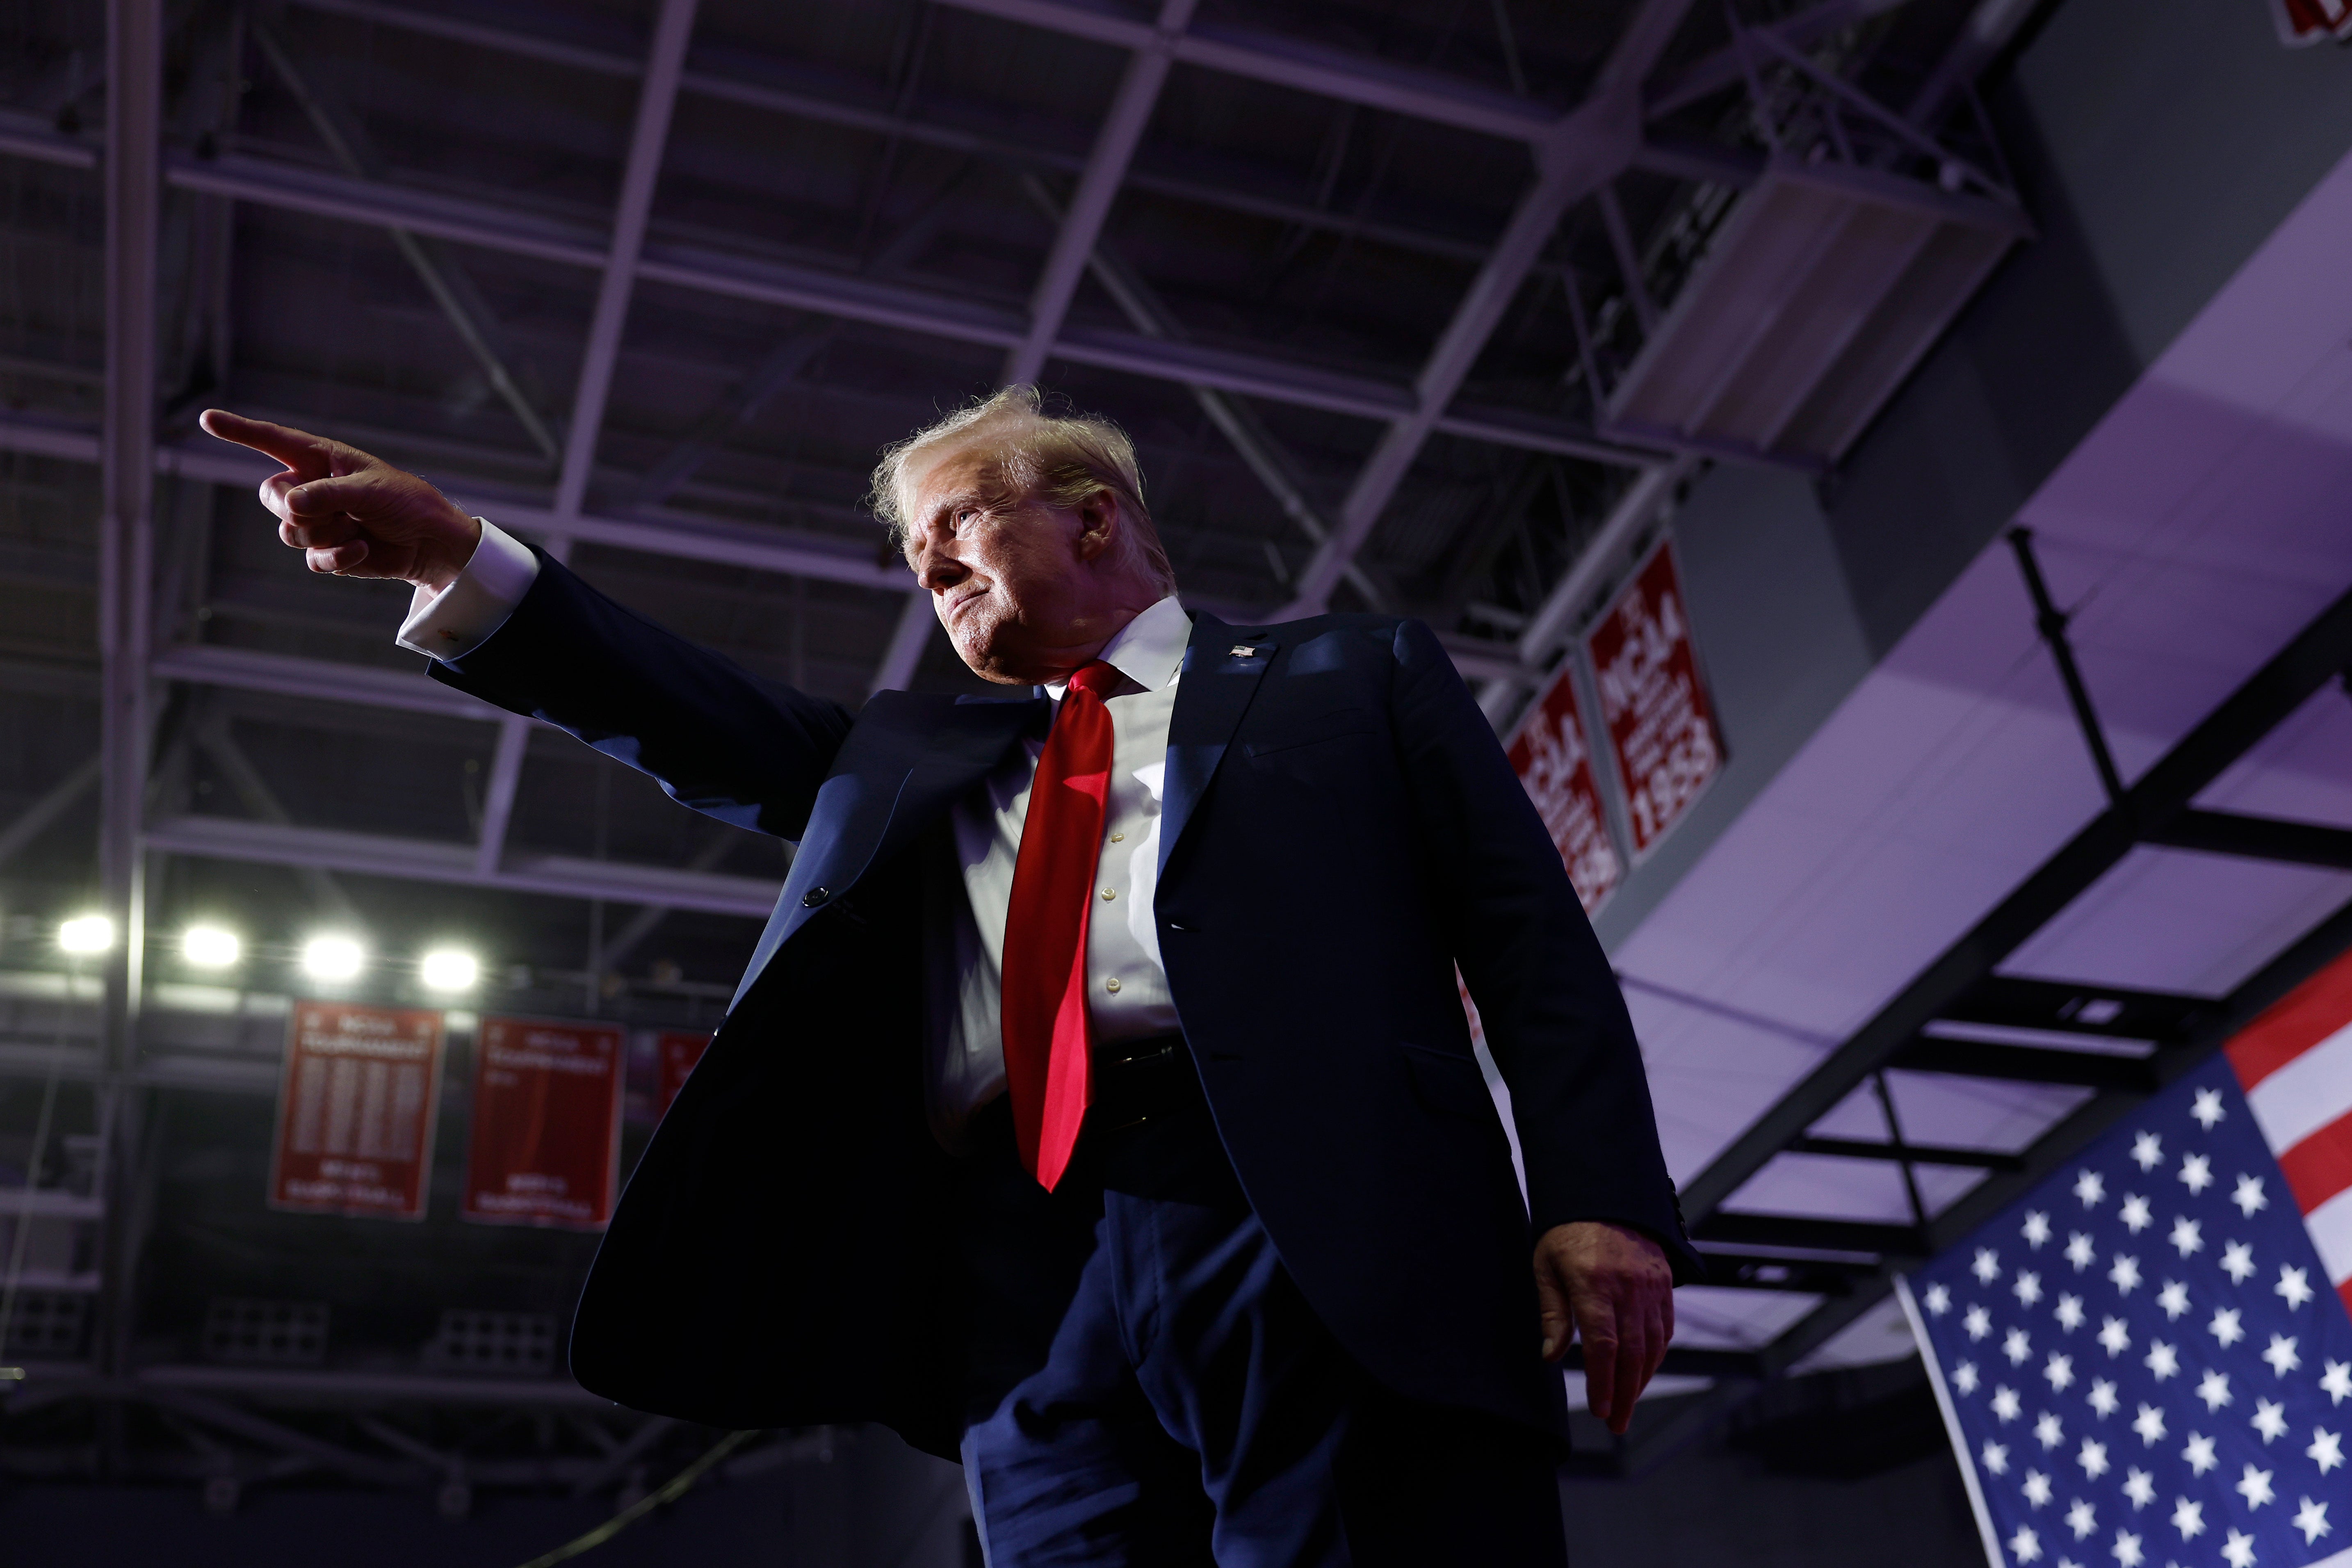 Donald Trump rallies in Philadelphia on June 22. A federal judge in Florida will decide whether he is under yet another gag order to restrict his statements targeting law enforcement.